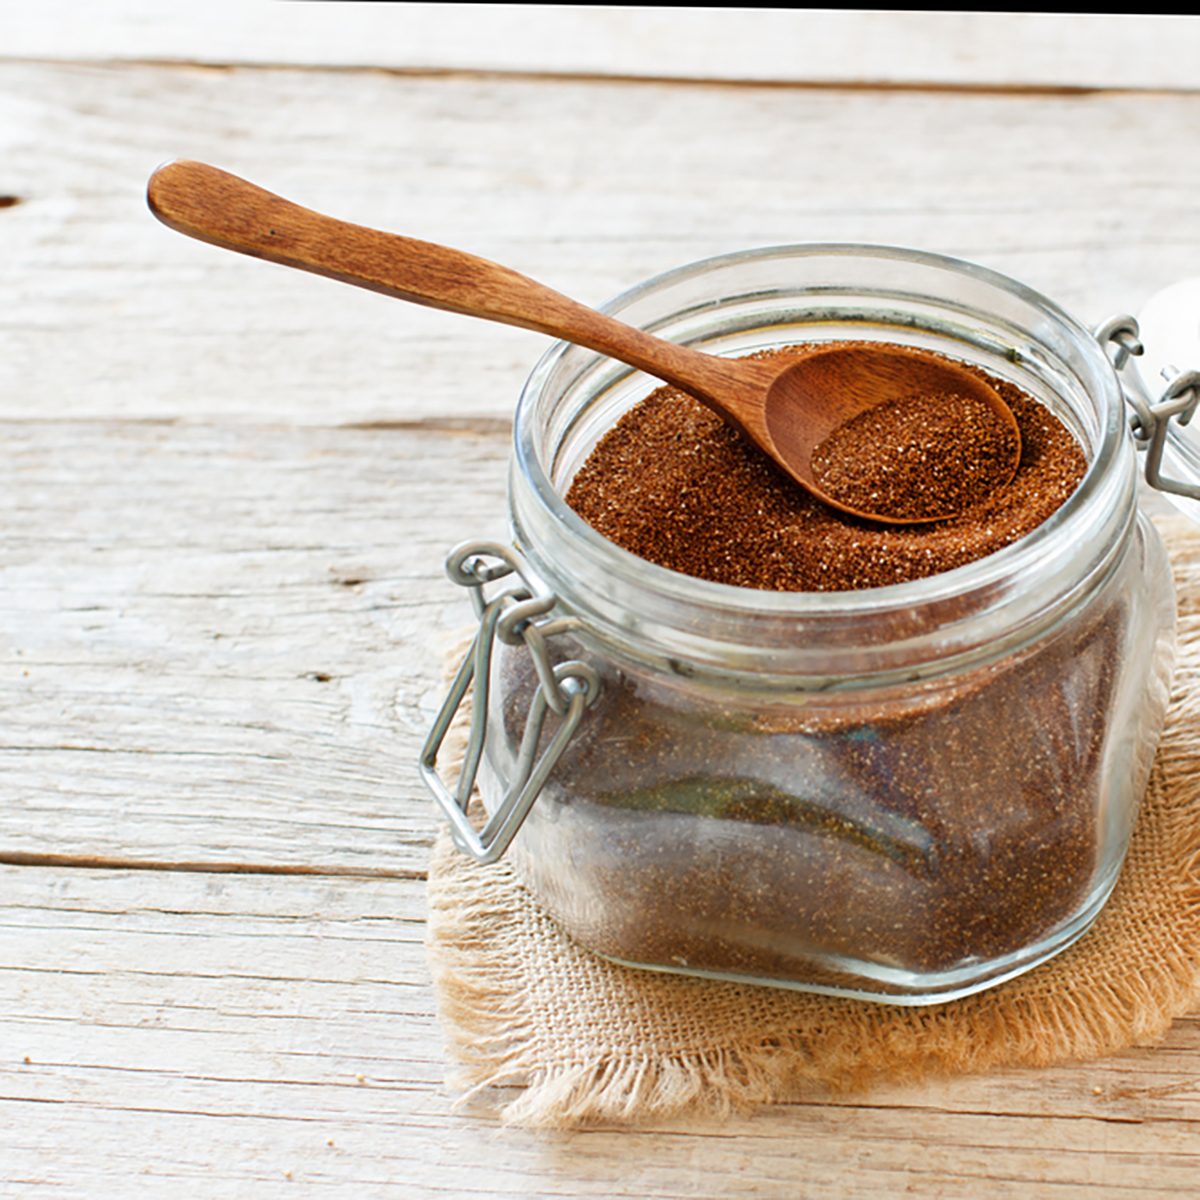 Uncooked teff grain in a glass jar with a spoon